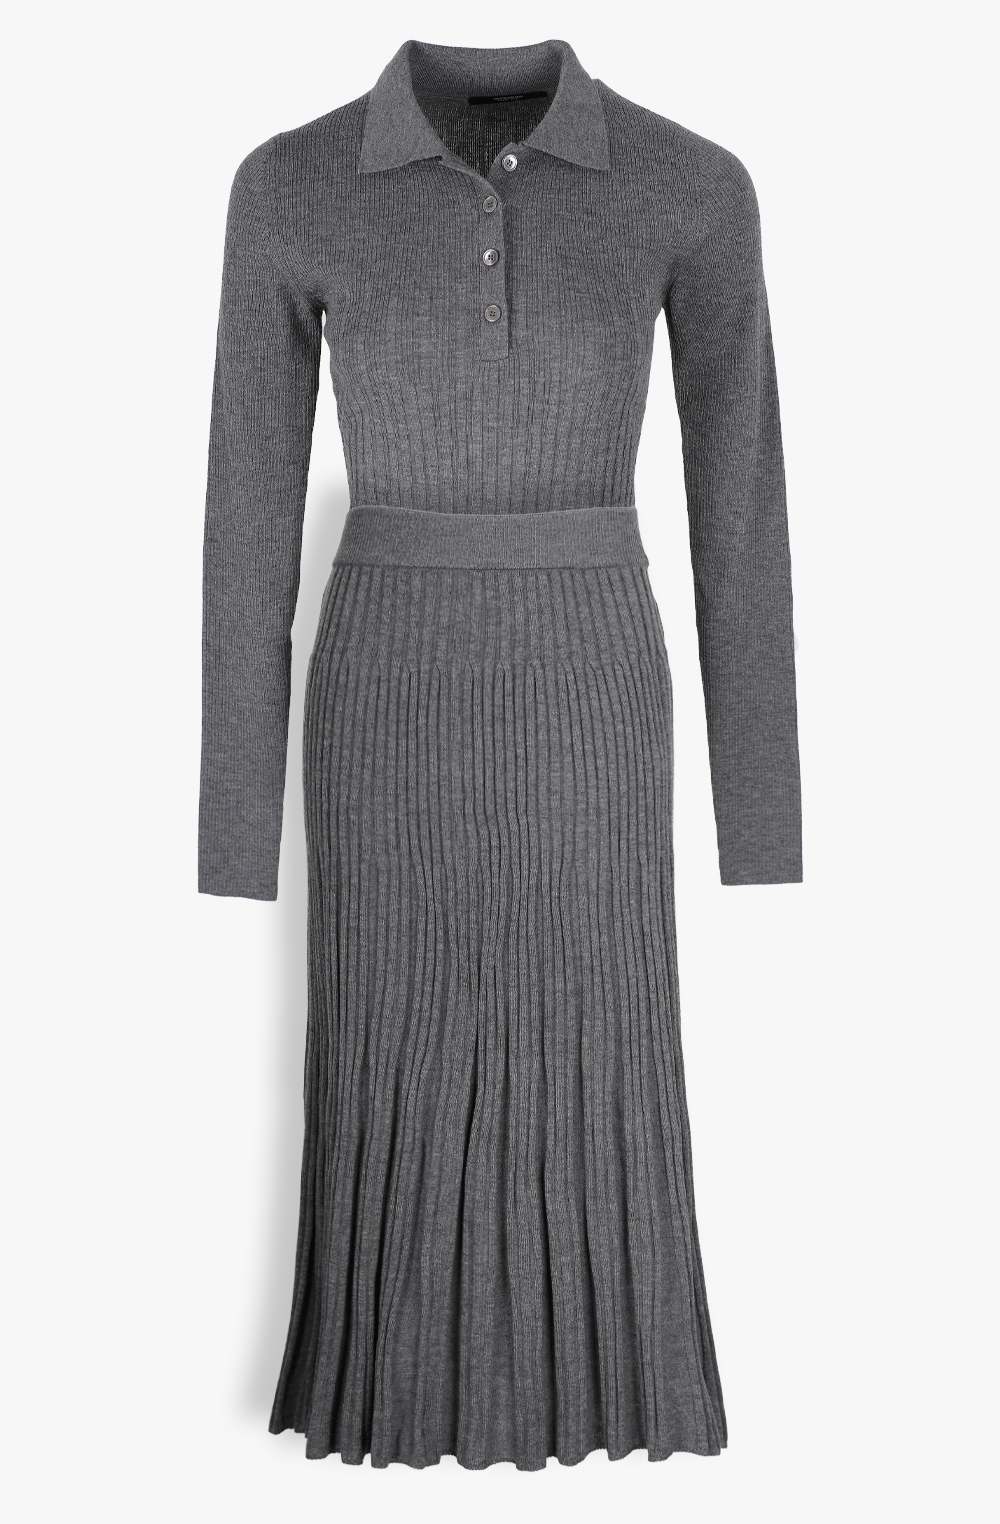 HIGH QUALITY LINE - LUXE RIBBED KNIT SHIRTS &amp; SKIRT Set (CHARCOAL GRAY) Superfine Merino Wool 100%